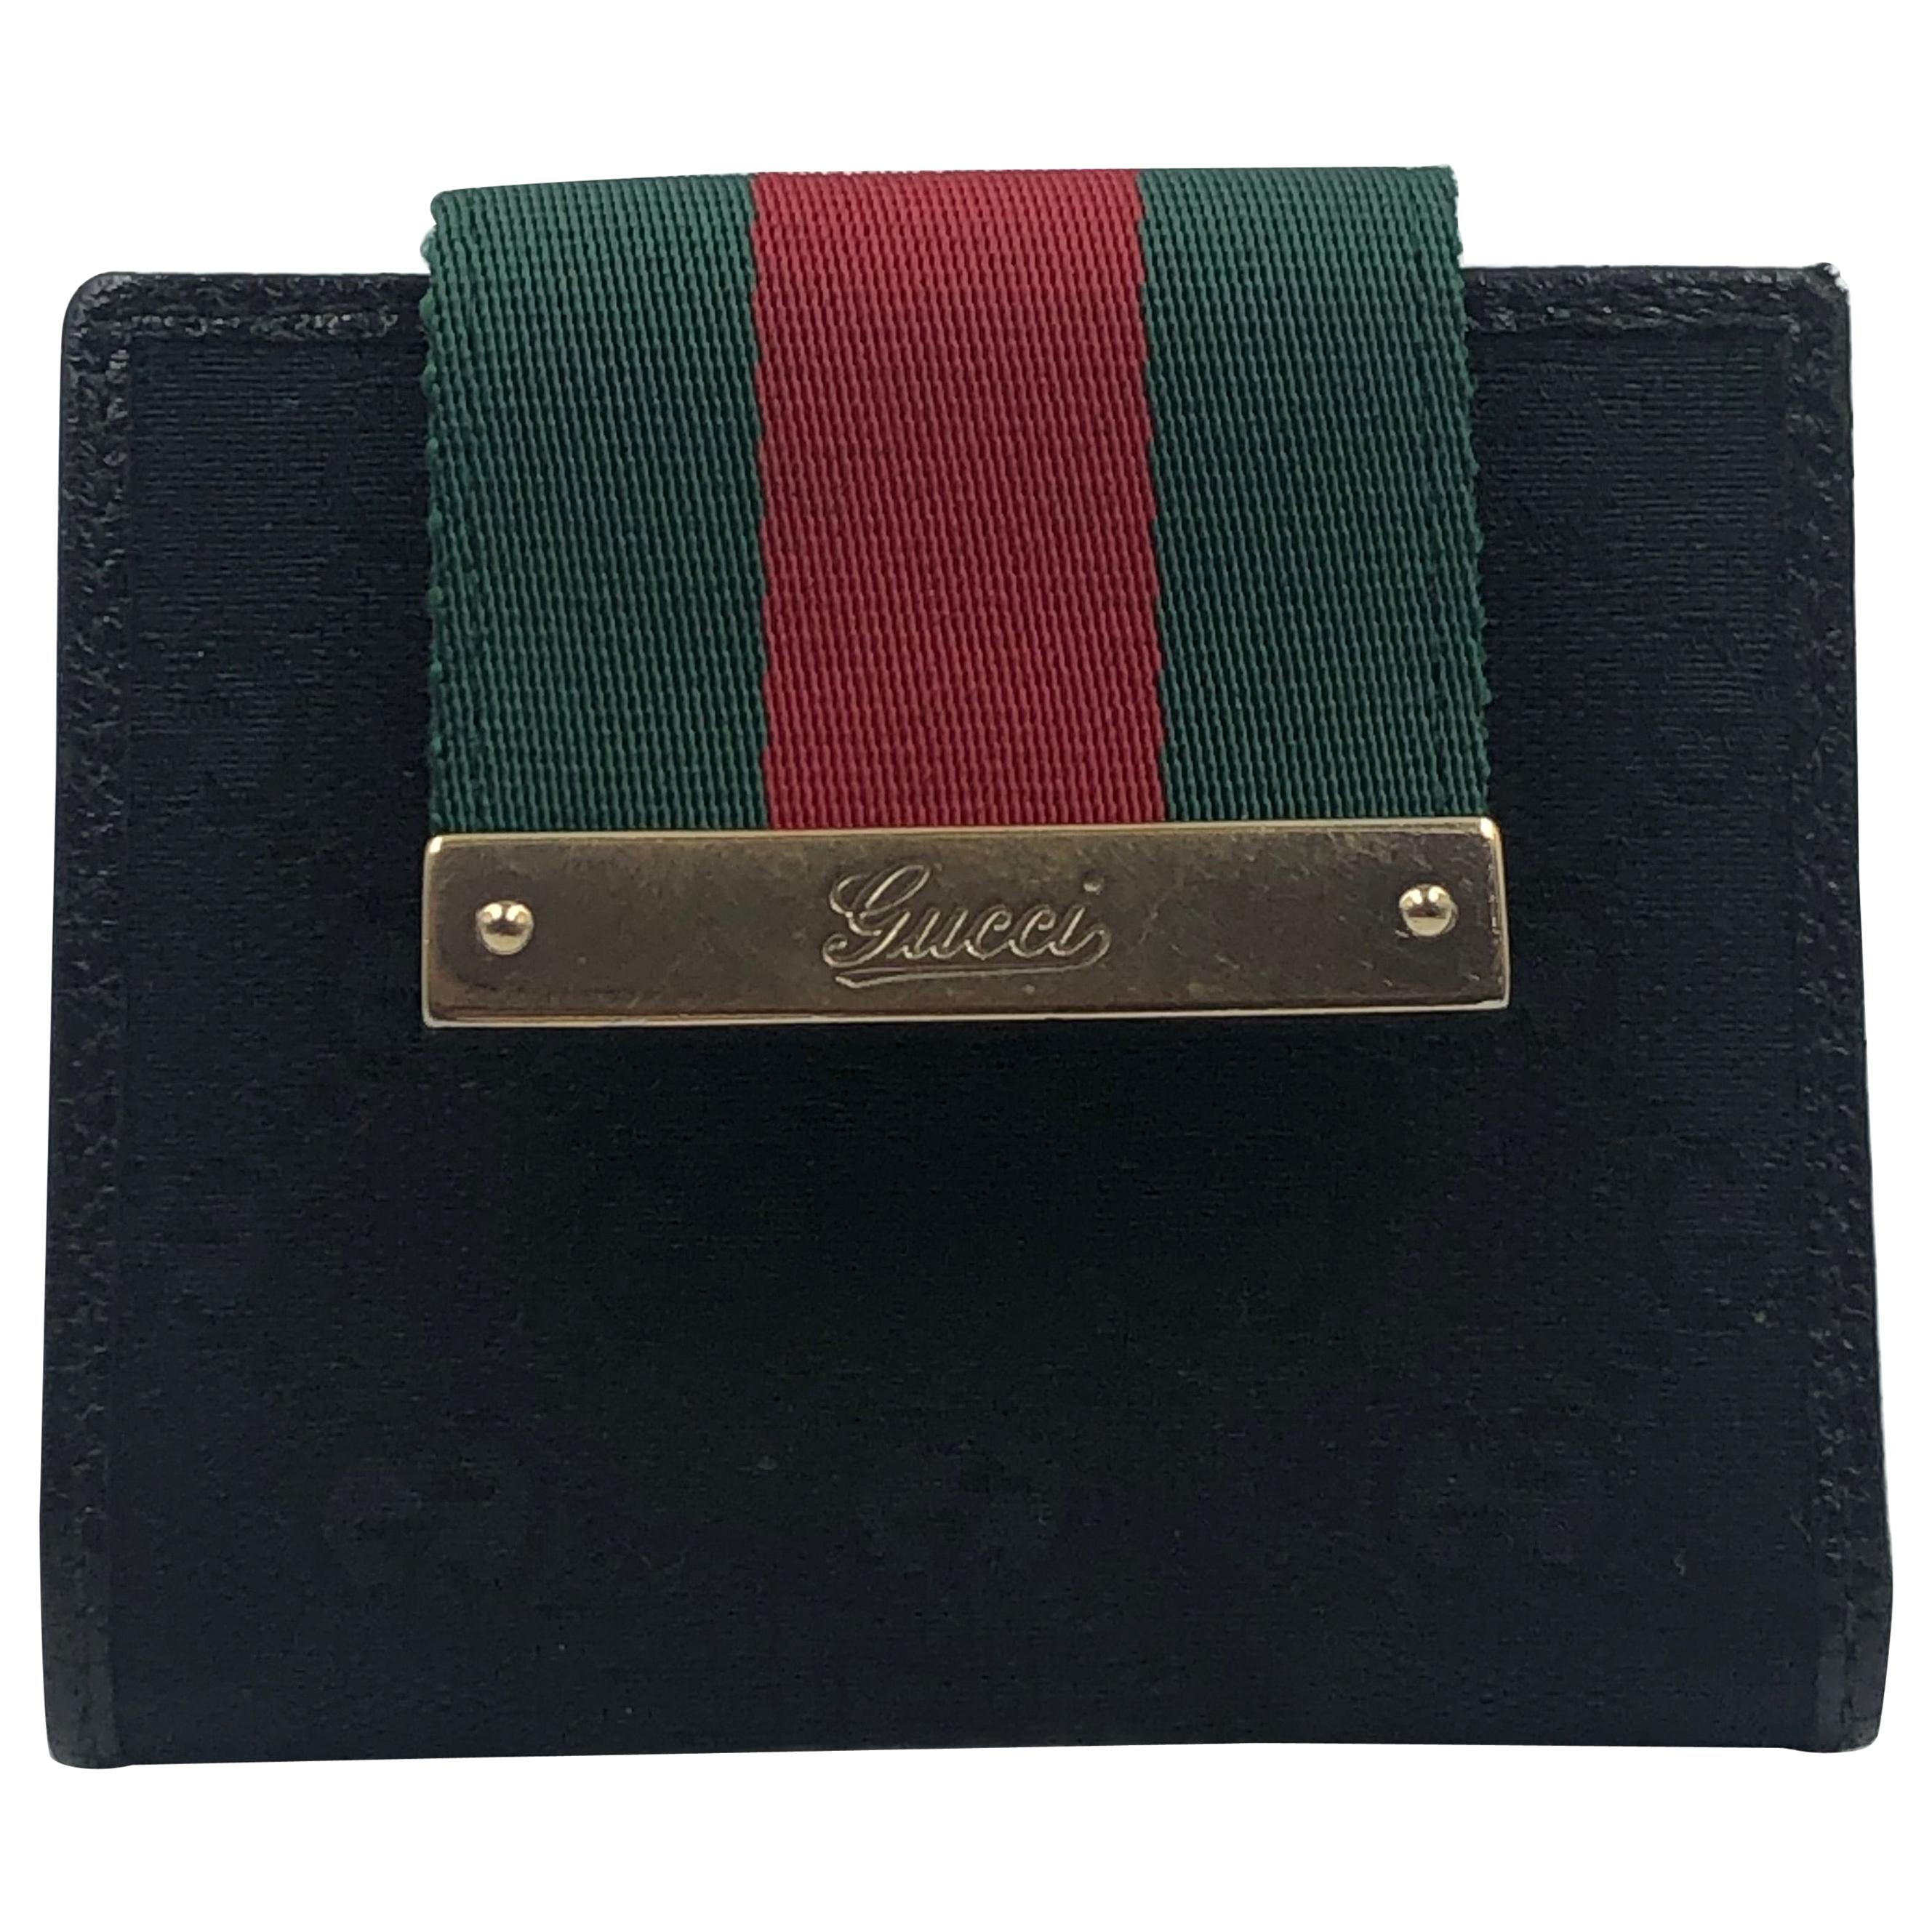 gucci wallet red green stripe